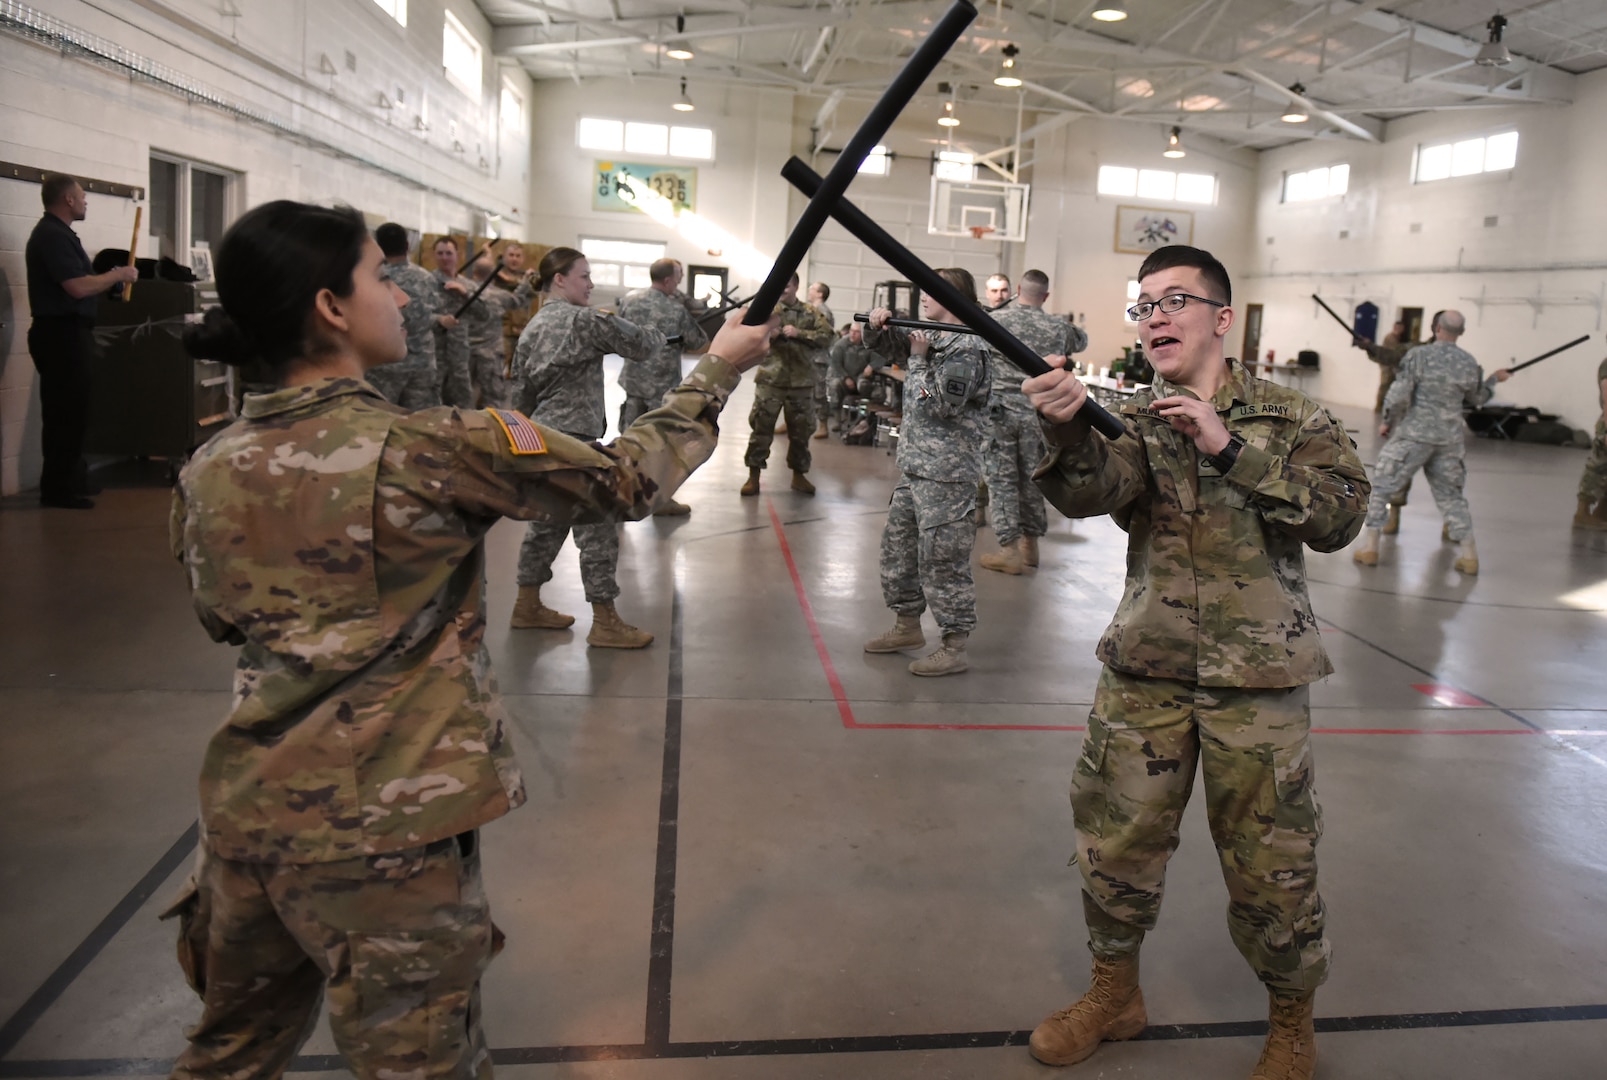 Pvt. Magdelena Corona and Pfc. Brock Munoz, assigned to the Wyoming Army National Guard 133rd Engineer Company, practice non-lethal baton techniques.